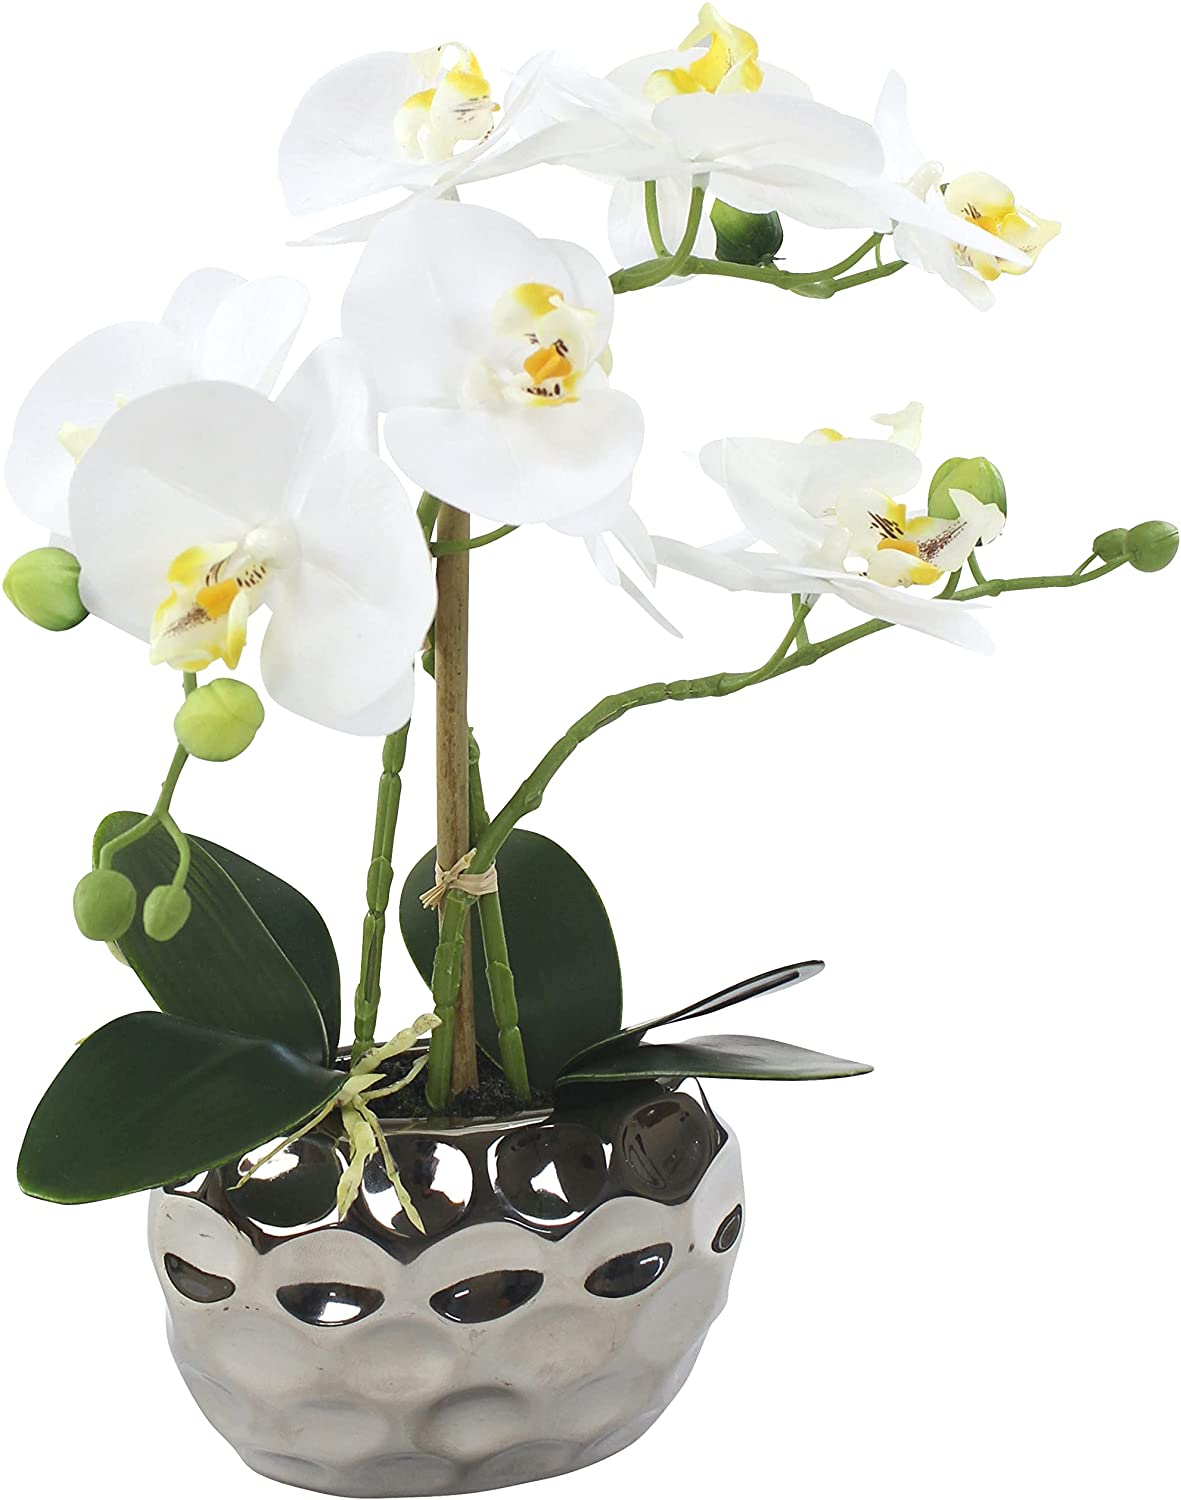 DARO DEKO Artificial Orchid Plant Oval Pot Silver High Gloss and White Flow